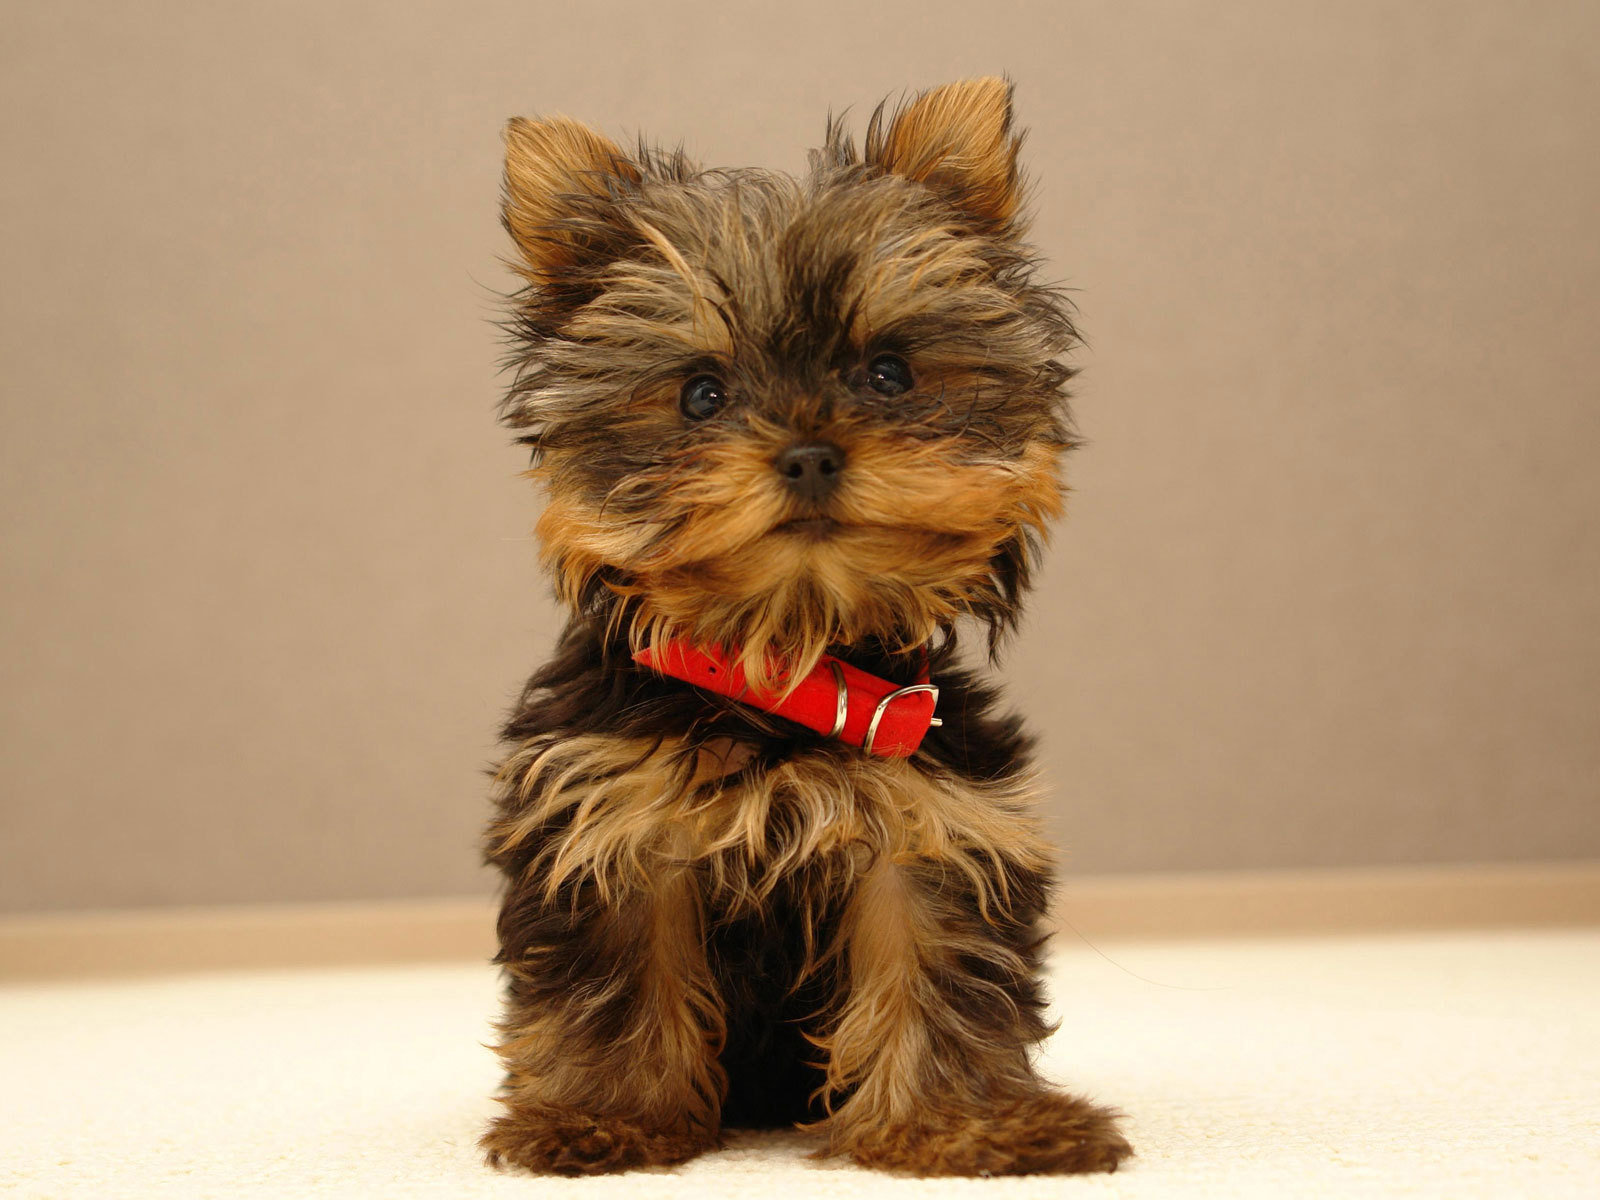 Cute puppy wallpapers Cute puppy stock photos 1600x1200